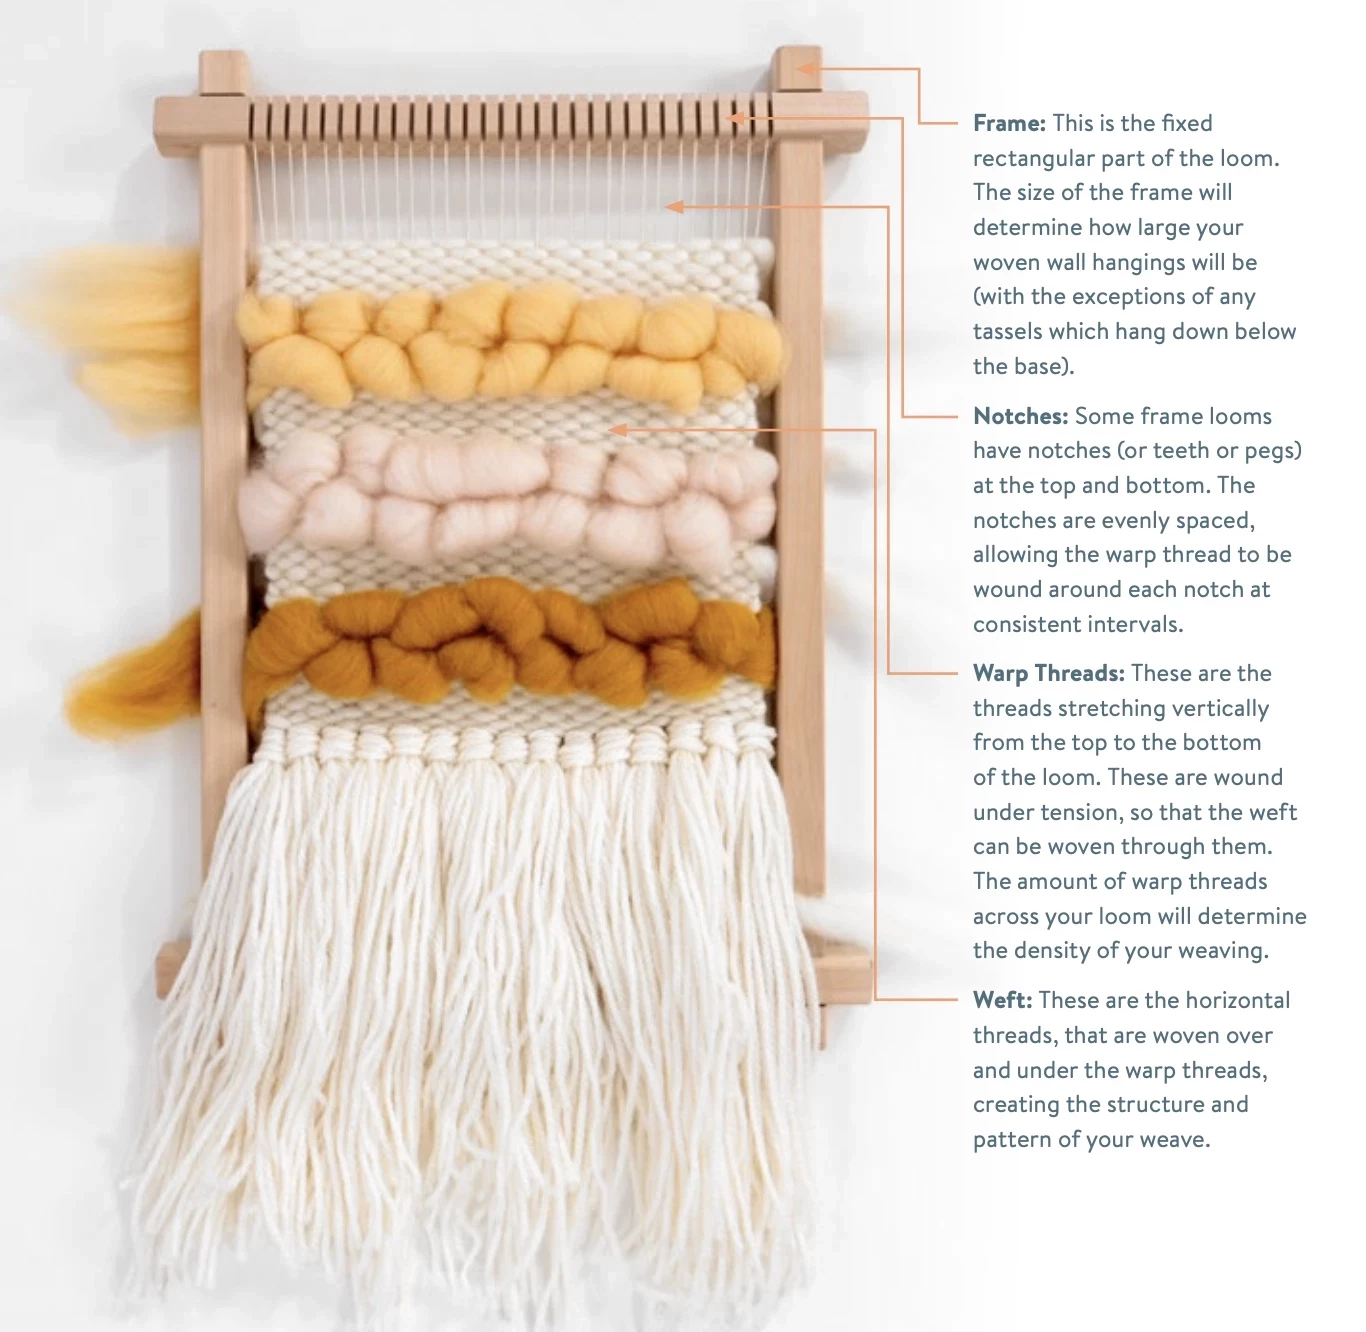 This is an image of the anatomy of a woven wall hanging with descriptions.